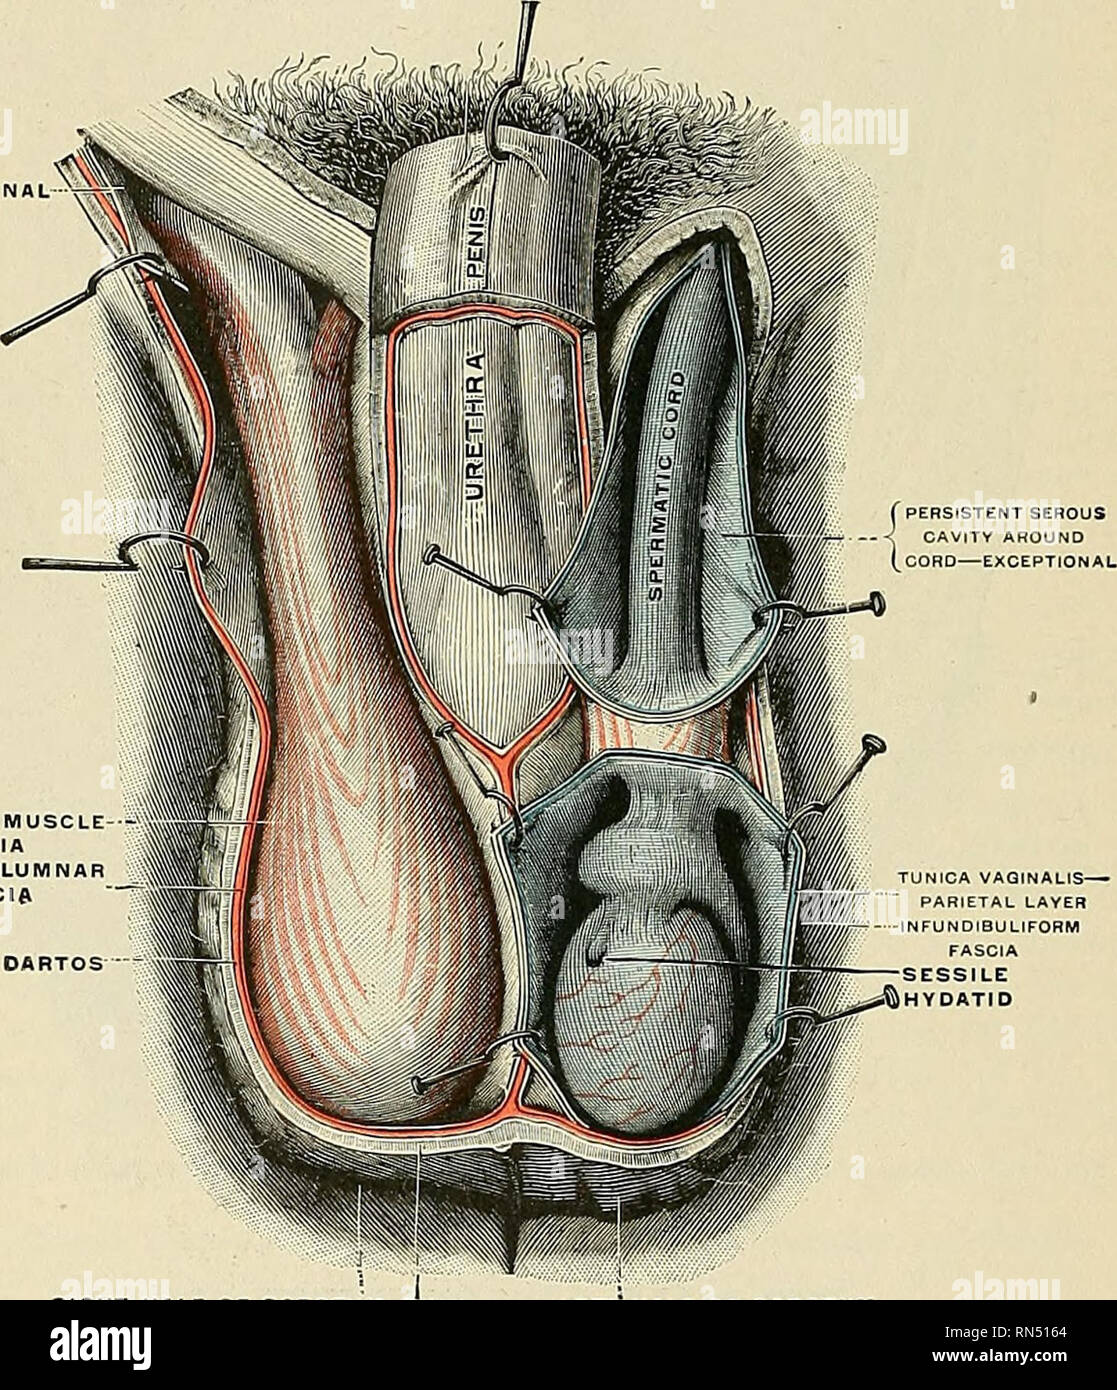 . Anatomy, descriptive and applied. Anatomy. 1372 THE VRINOGENITAL ORGANS from the serous, muscular, and fibrous layers of the abdominal parietes as well as by the scrotum proper. The coverings of the testis are the following: Skin ) o . bcrotum. Dartos Intercolumnar or External spermatic fascia. Cremasteric fascia. Infundibuliform or Internal spermatic fascia. Tunica vaginalis. ^IGUINAL CA CREMASTERIC AND FASC INTEHCO FASC. 4LF OF SCF Fig. 1140.—The scrotum. On the left side the cavity of the tunica vaginalis has been opened; on the right side only the layers superficial to the Cremaster have Stock Photo